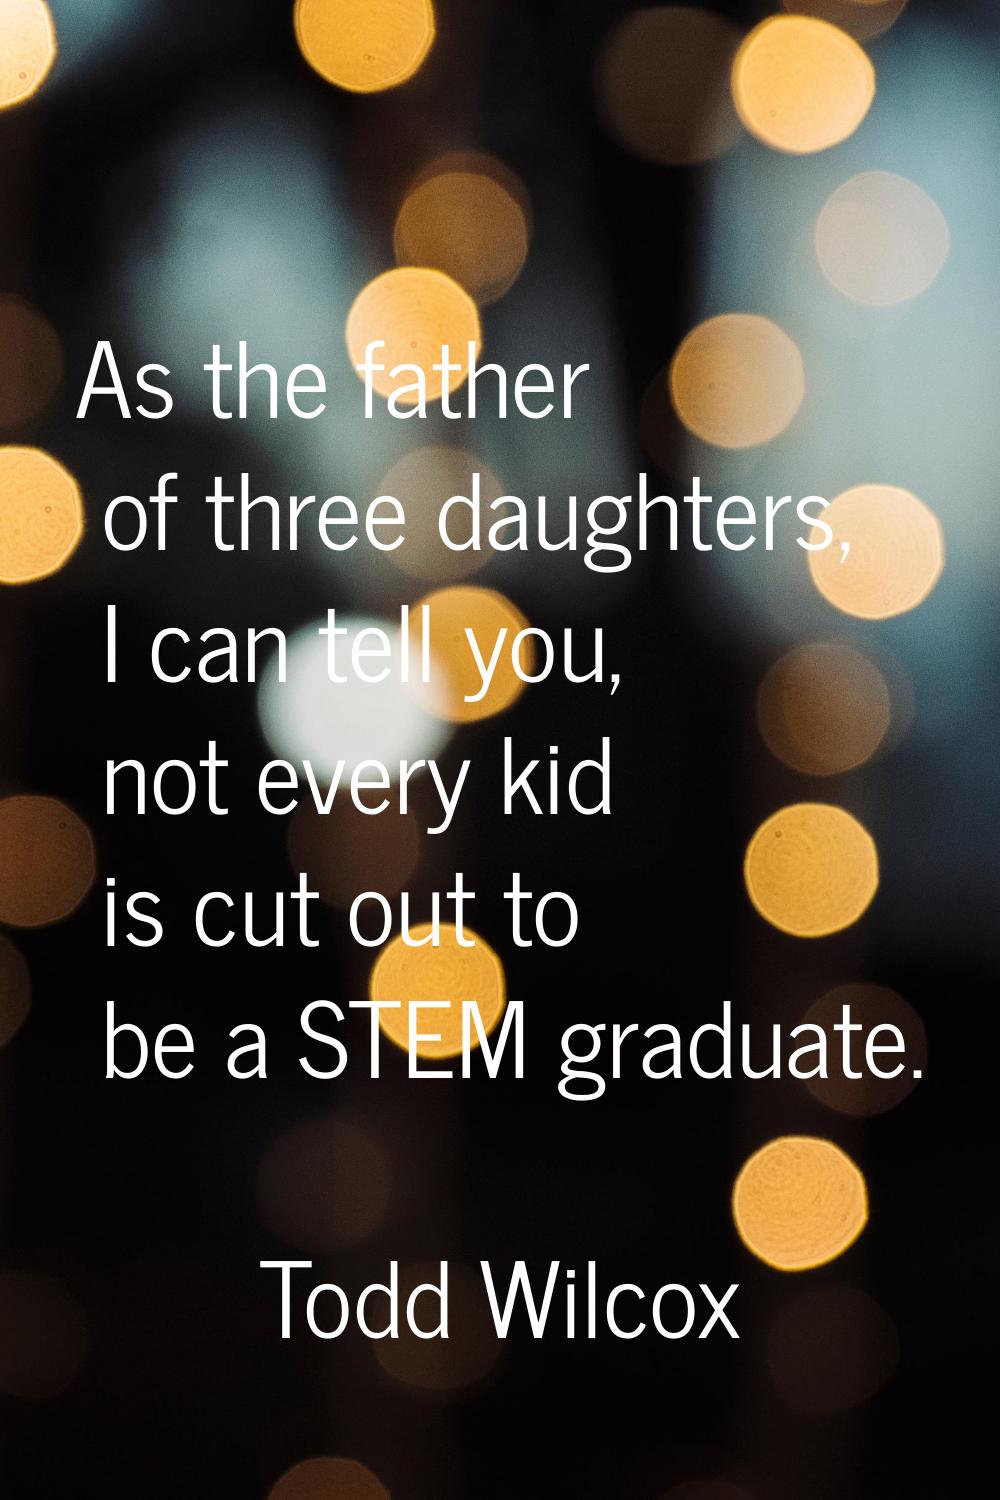 As the father of three daughters, I can tell you, not every kid is cut out to be a STEM graduate.